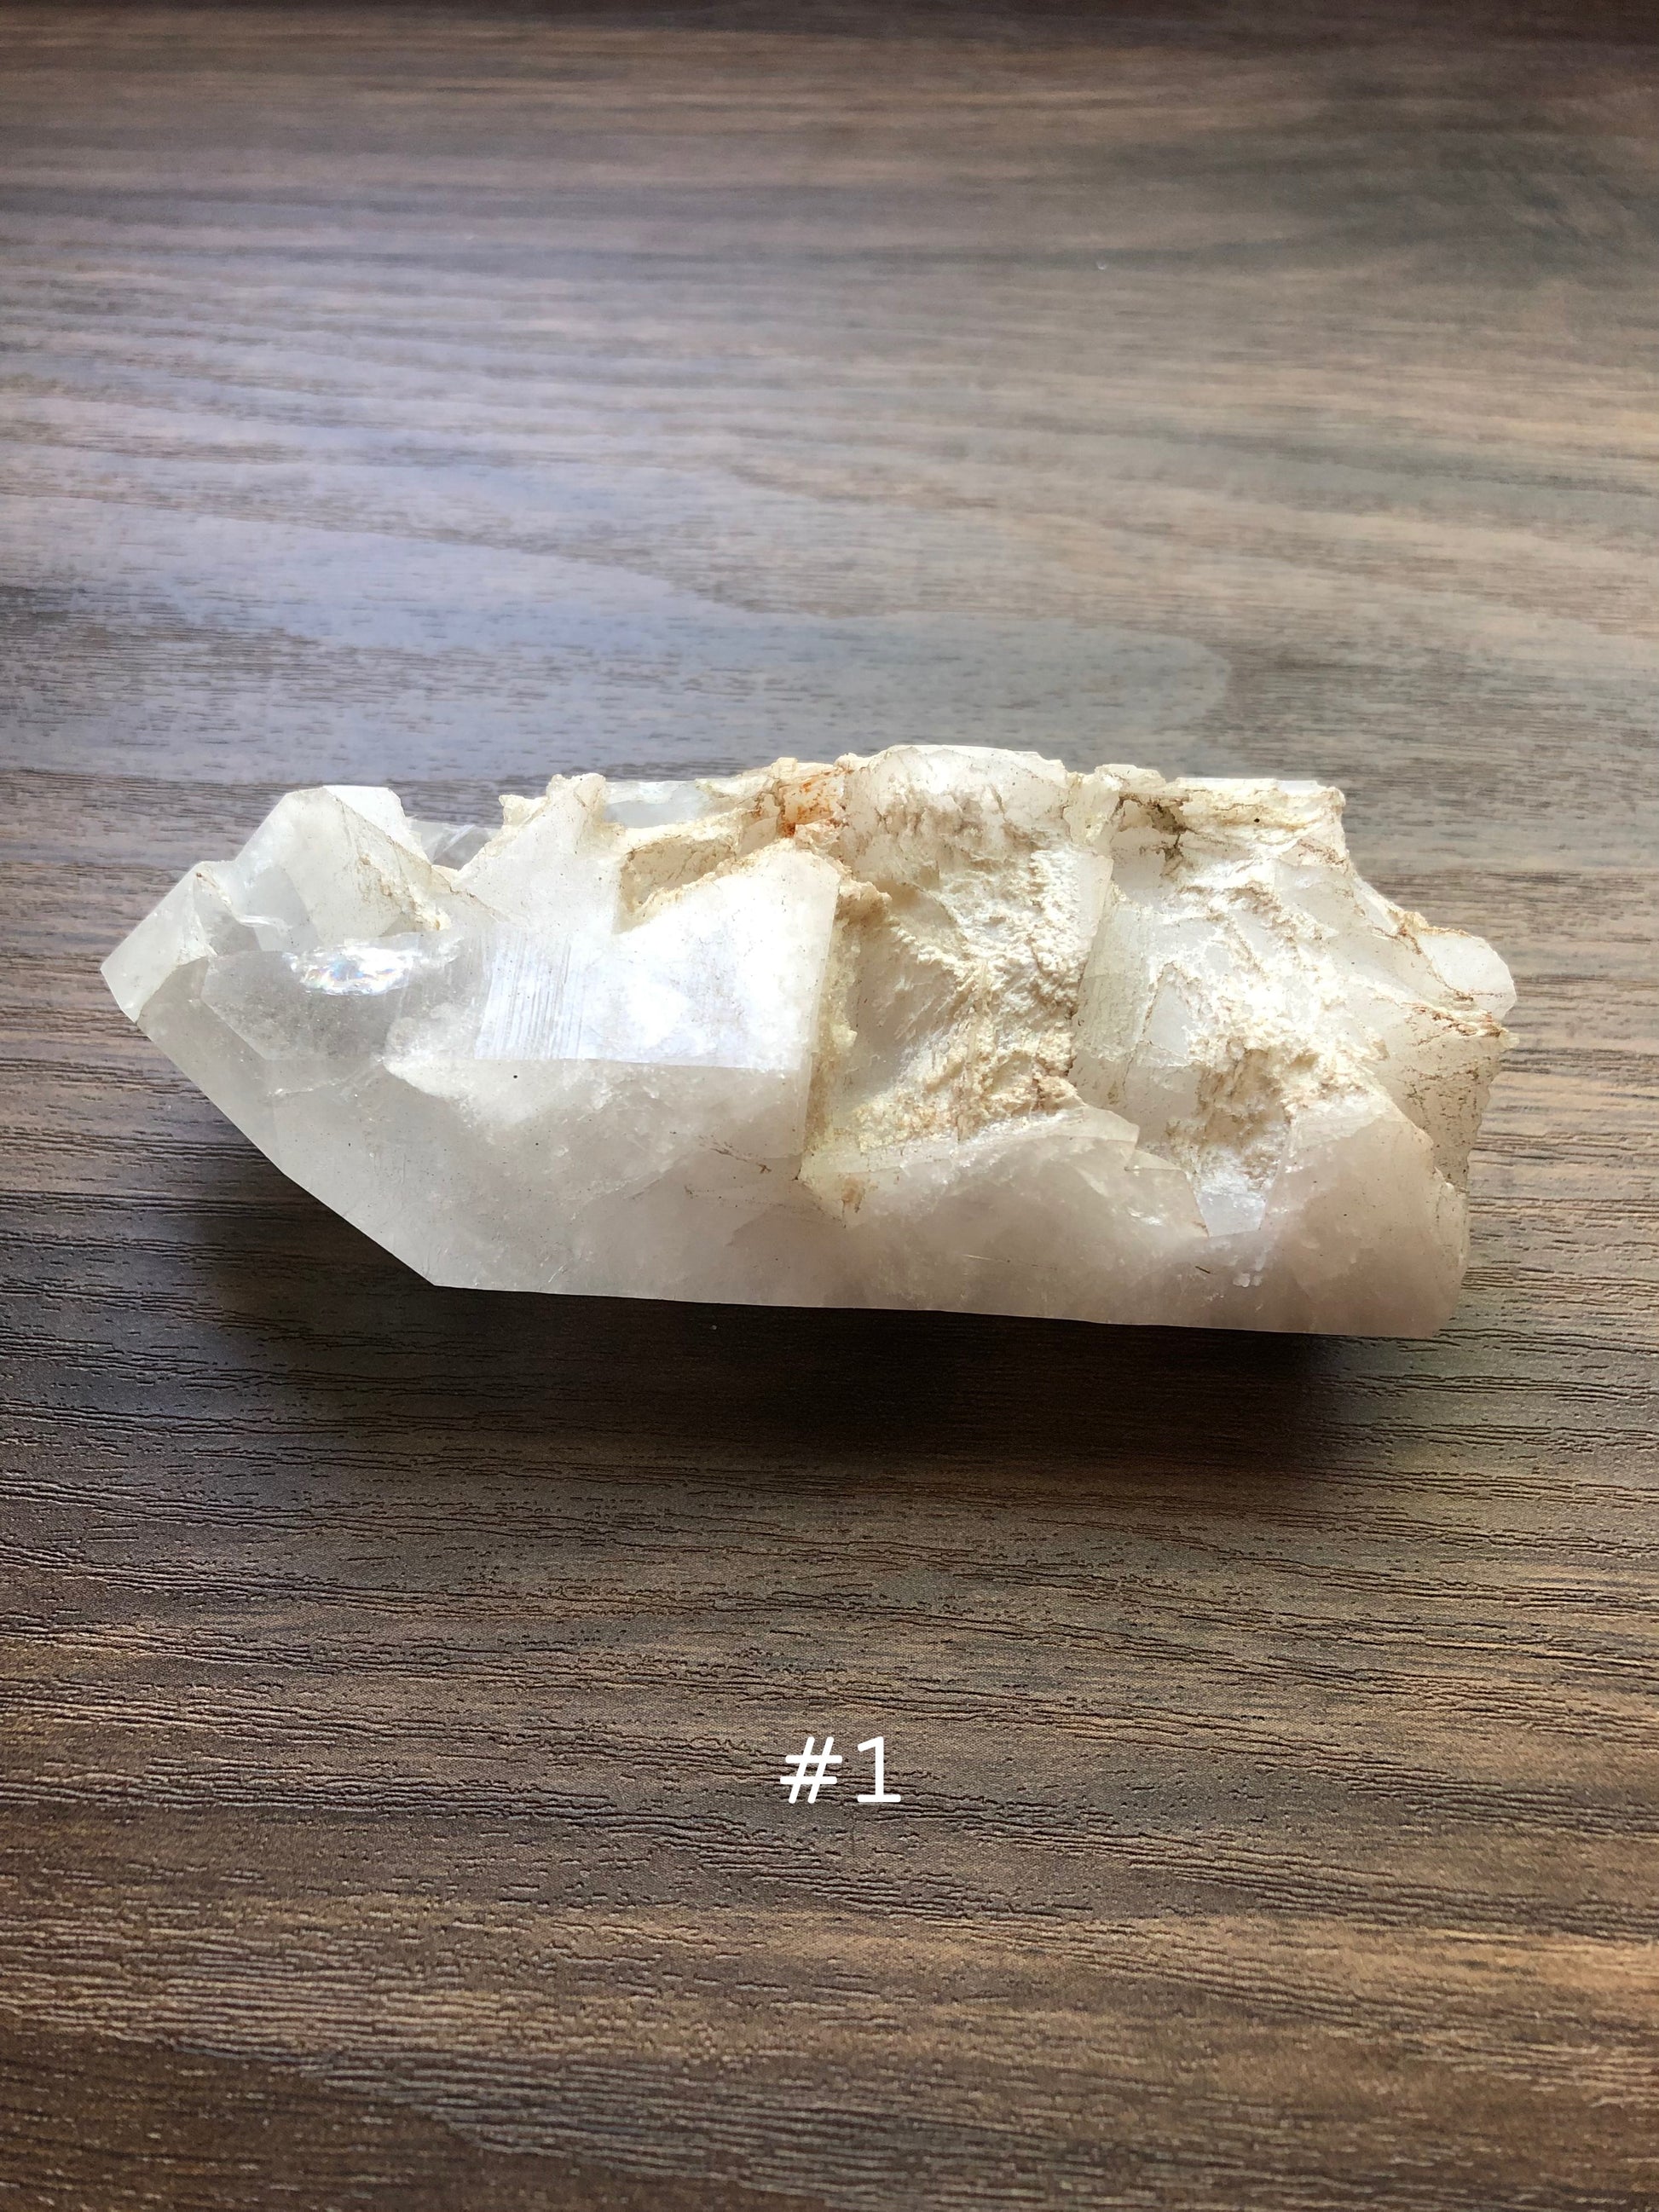 A large, rough cut quartz crystal rests on a wooden surface. It is jagged in shape. The crystal is relatively clear, with part of it being discolored. The number 1 is shown on the picture.